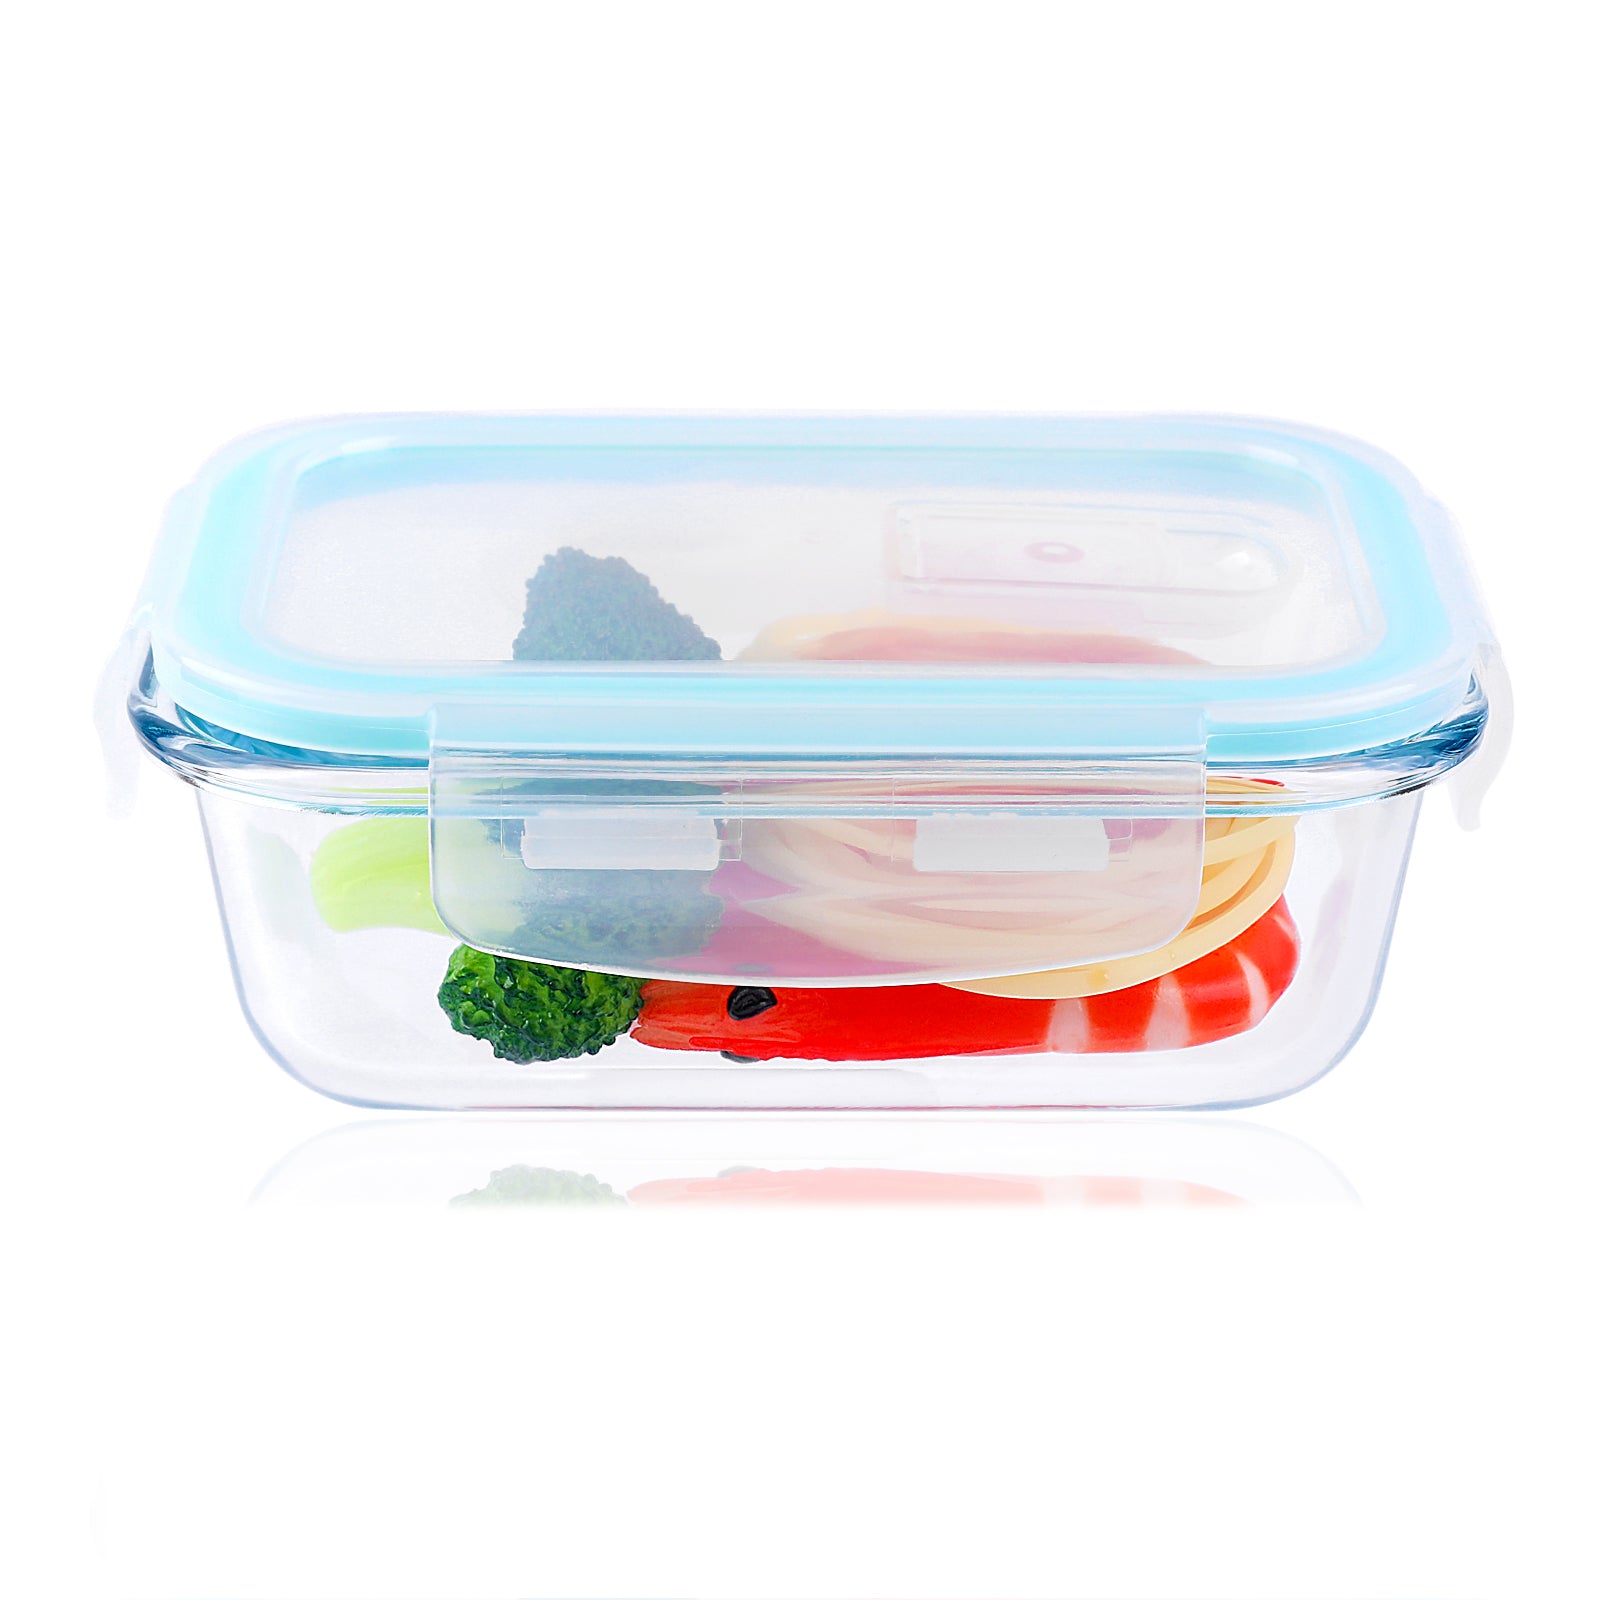 410 ml + 1040 ml Glass Meal Prep Containers Reusable wholesale